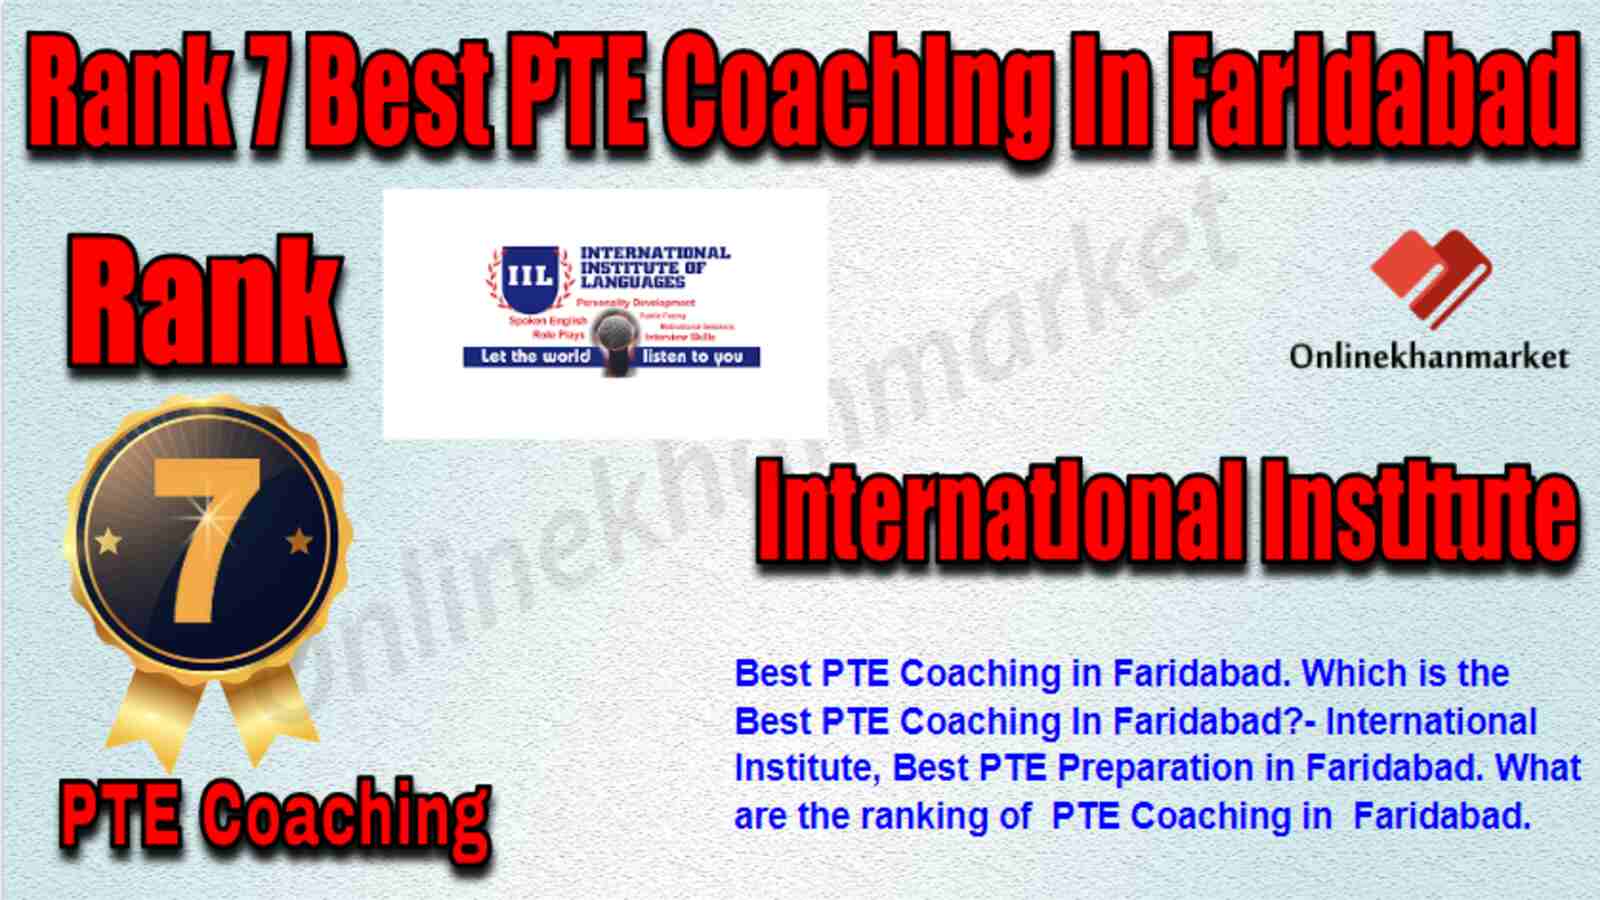 Rank 7 Best PTE Coaching in Faridabad